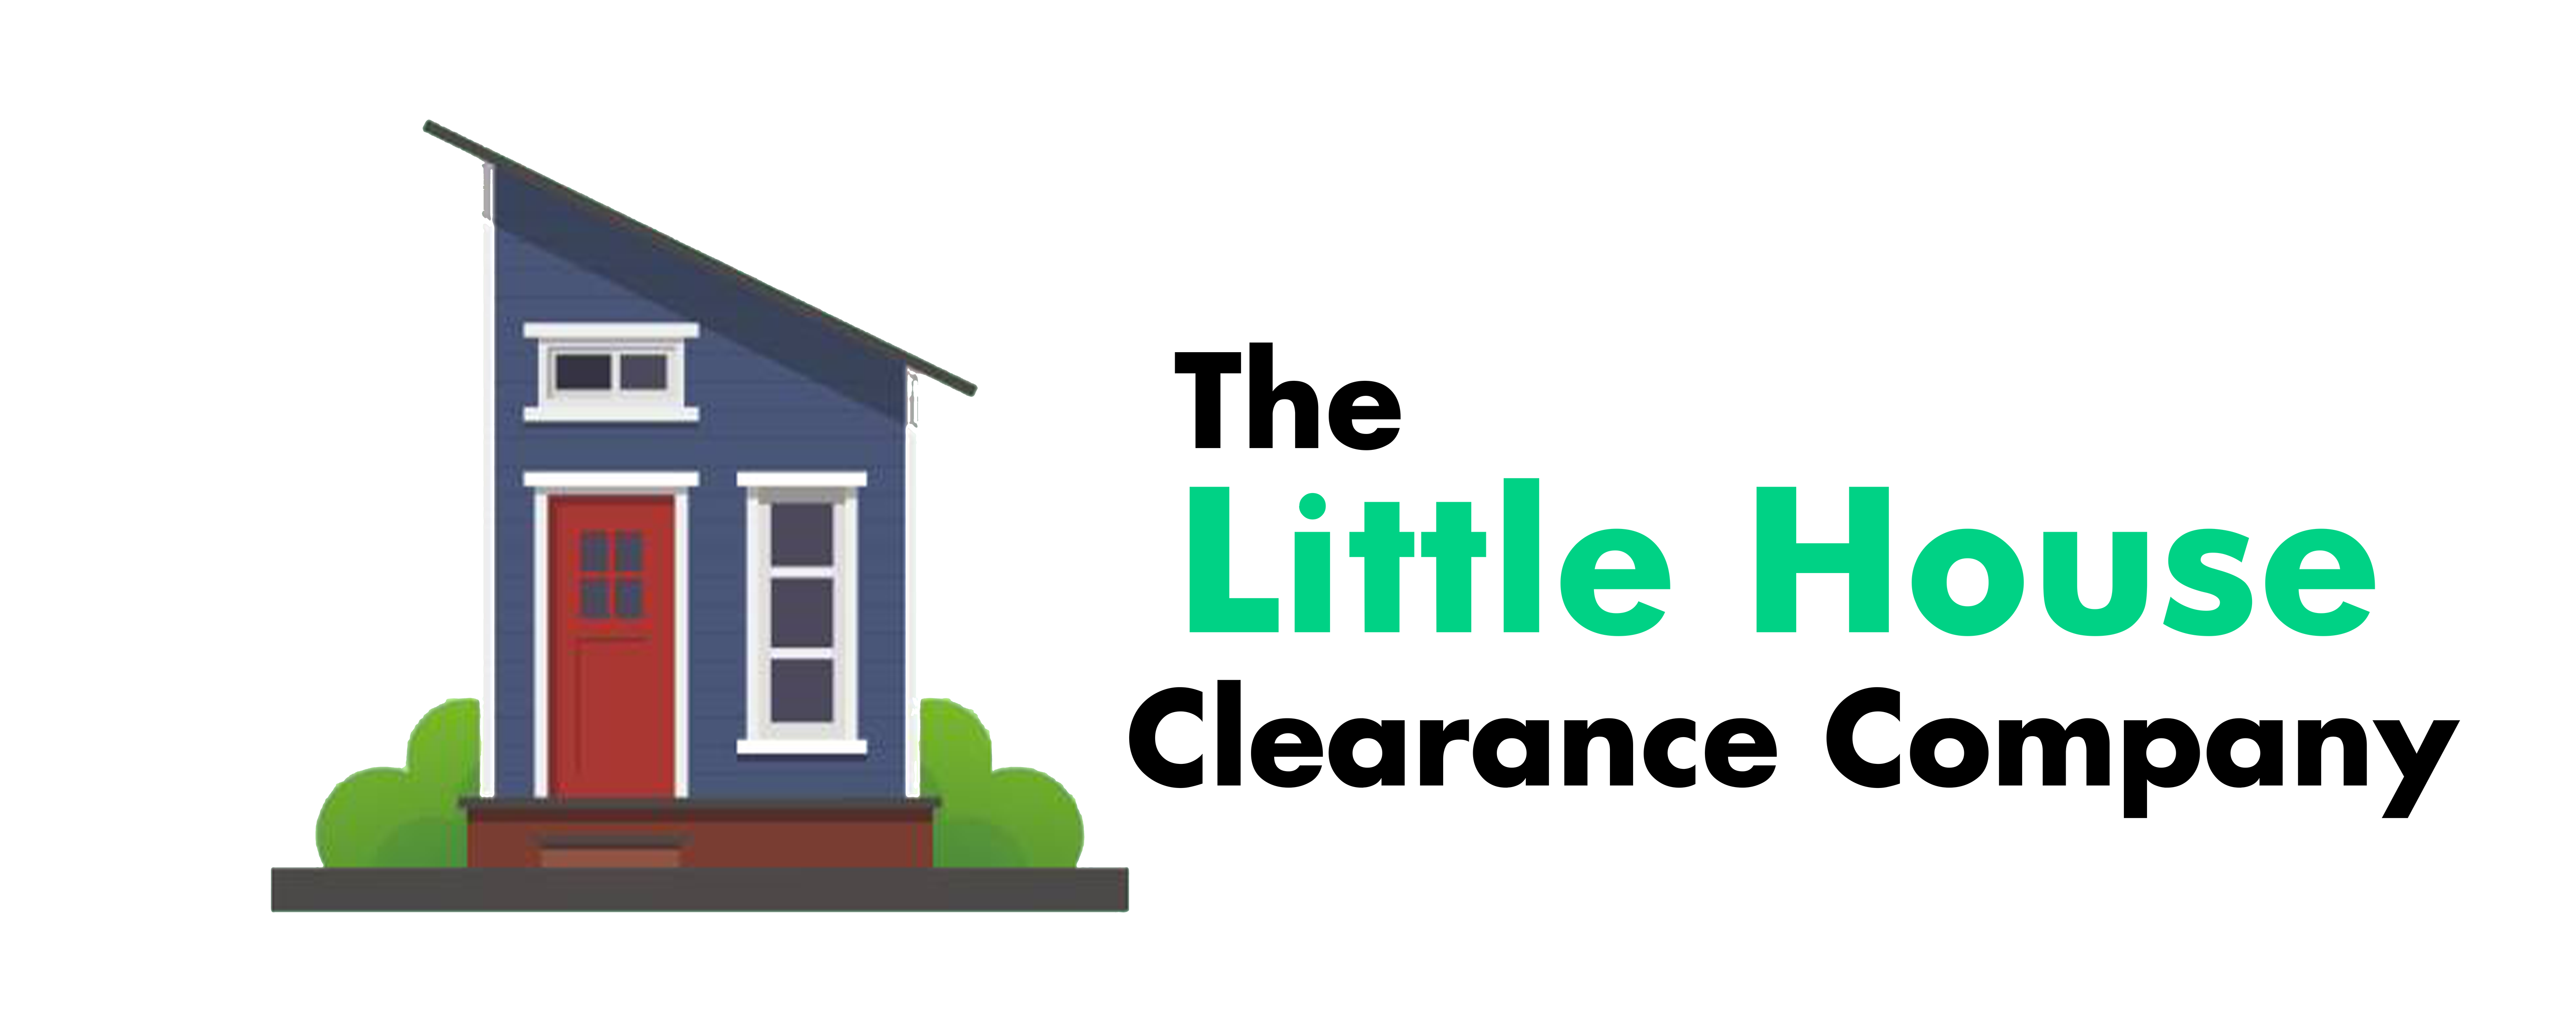 The Little House Clearance Company | Portsmouth, Hampshire